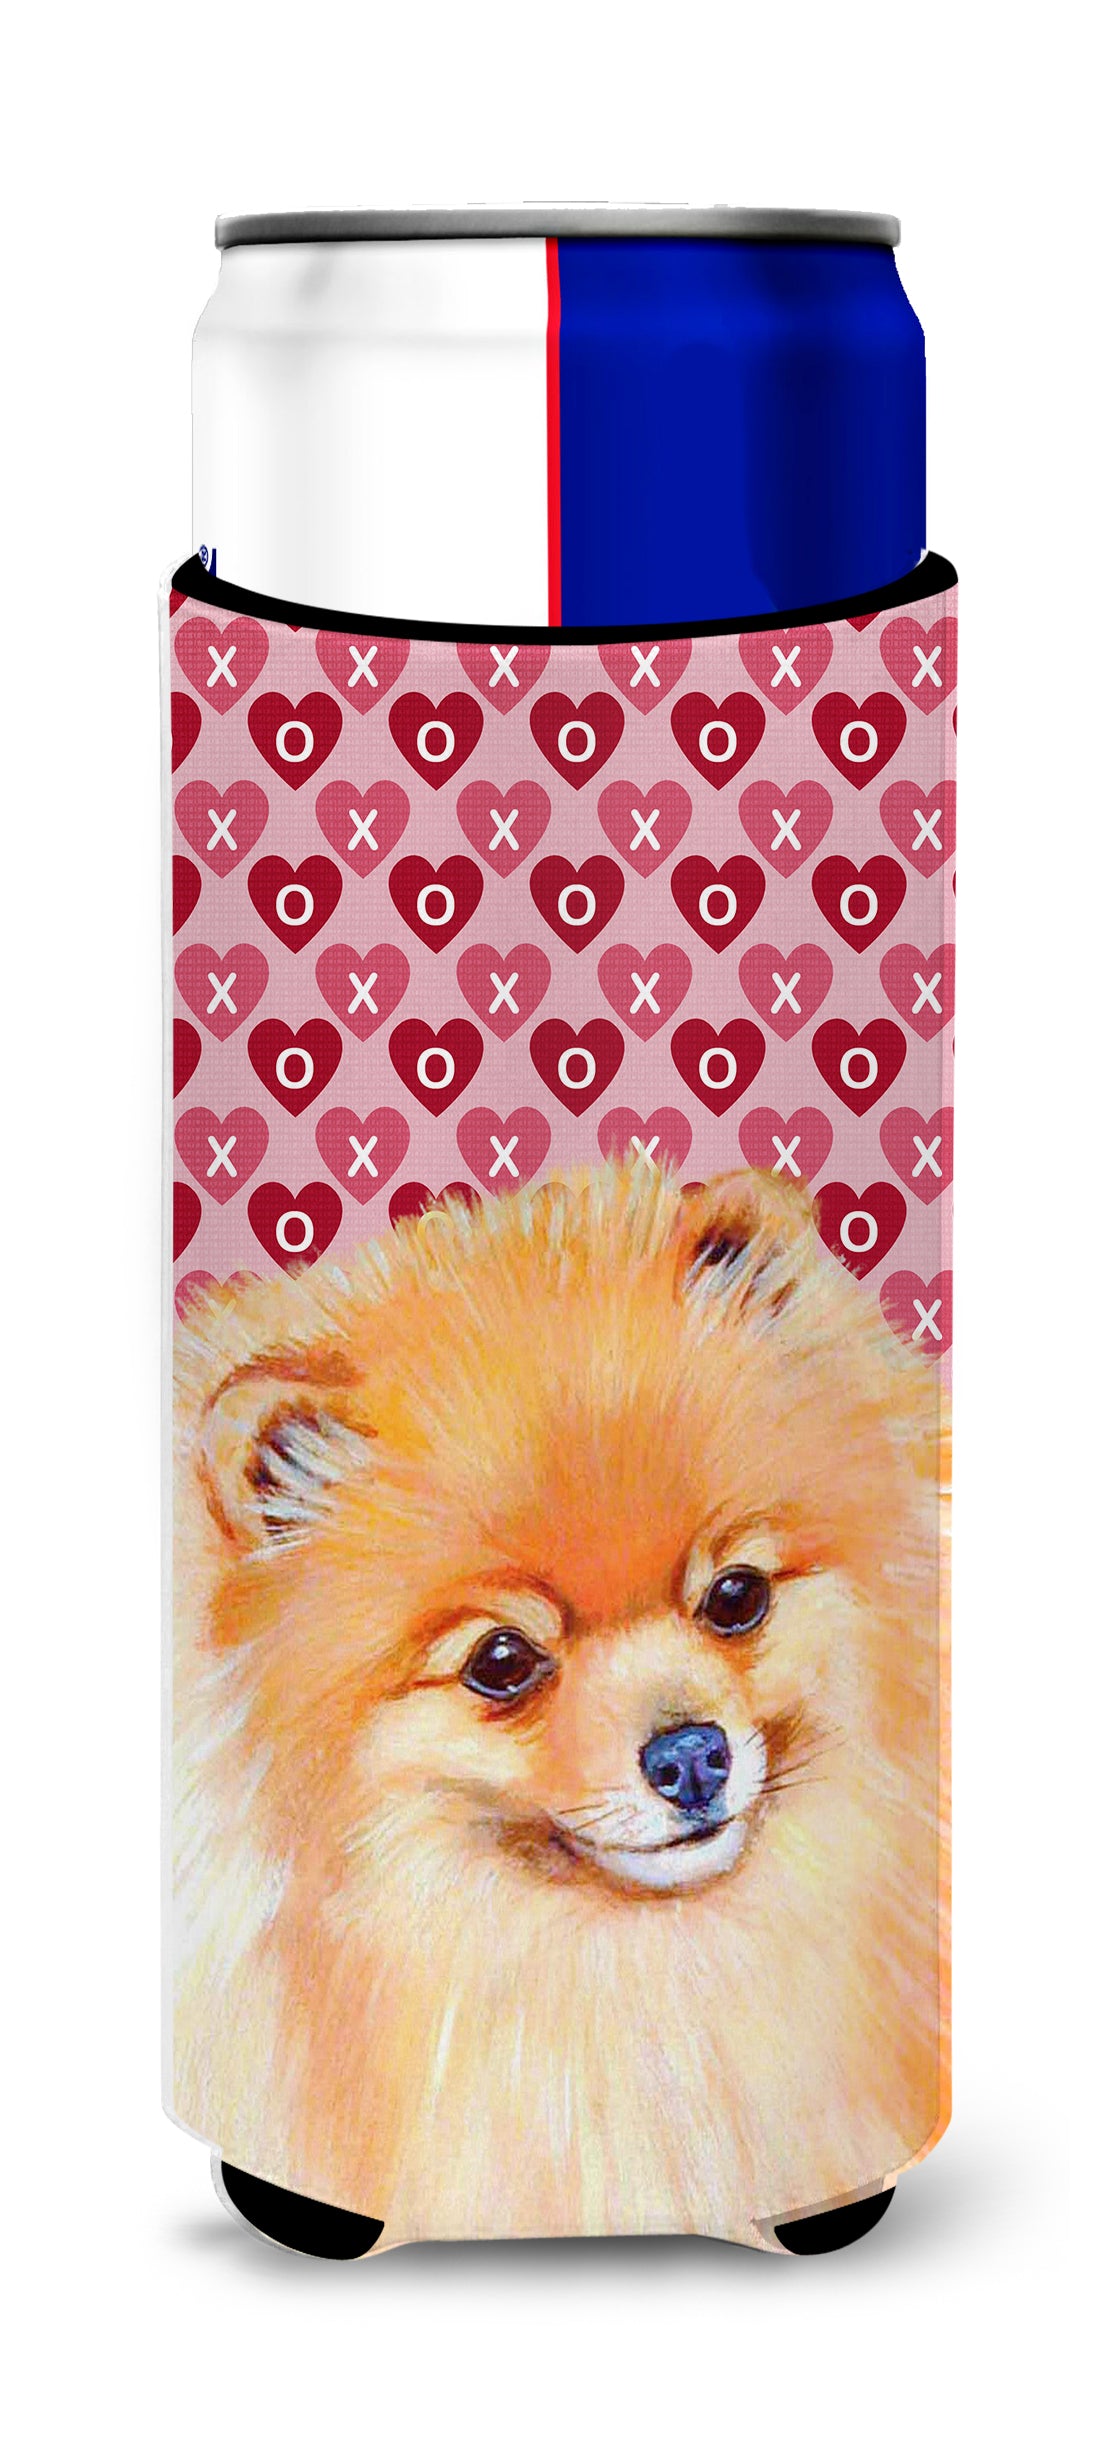 Pomeranian Hearts Love and Valentine's Day Portrait Ultra Beverage Insulators for slim cans LH9170MUK.